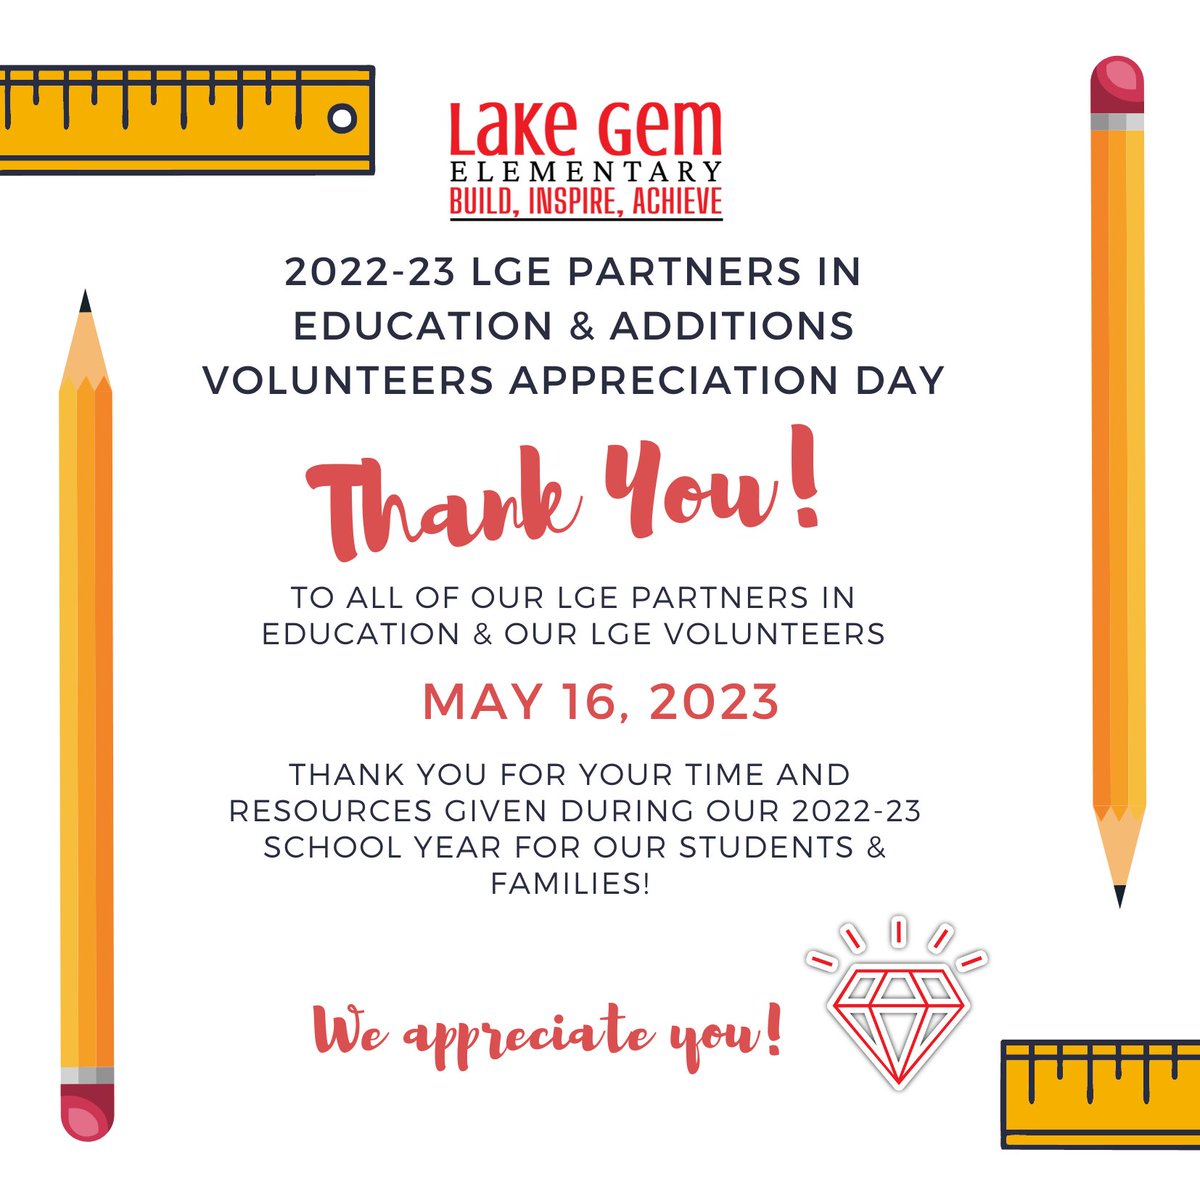 Today we celebrate our Community Partners in Education and our School Volunteers. Thank you for your dedication to our Students, our Families, and our Staff!

#LakeGemProud
#BuildInspireAchieve
#LGEPIE
#LGEADDitionsVolunteers
@ocpsnews @LgeParent @OCPS_PFE 
@Fdn4OCPS